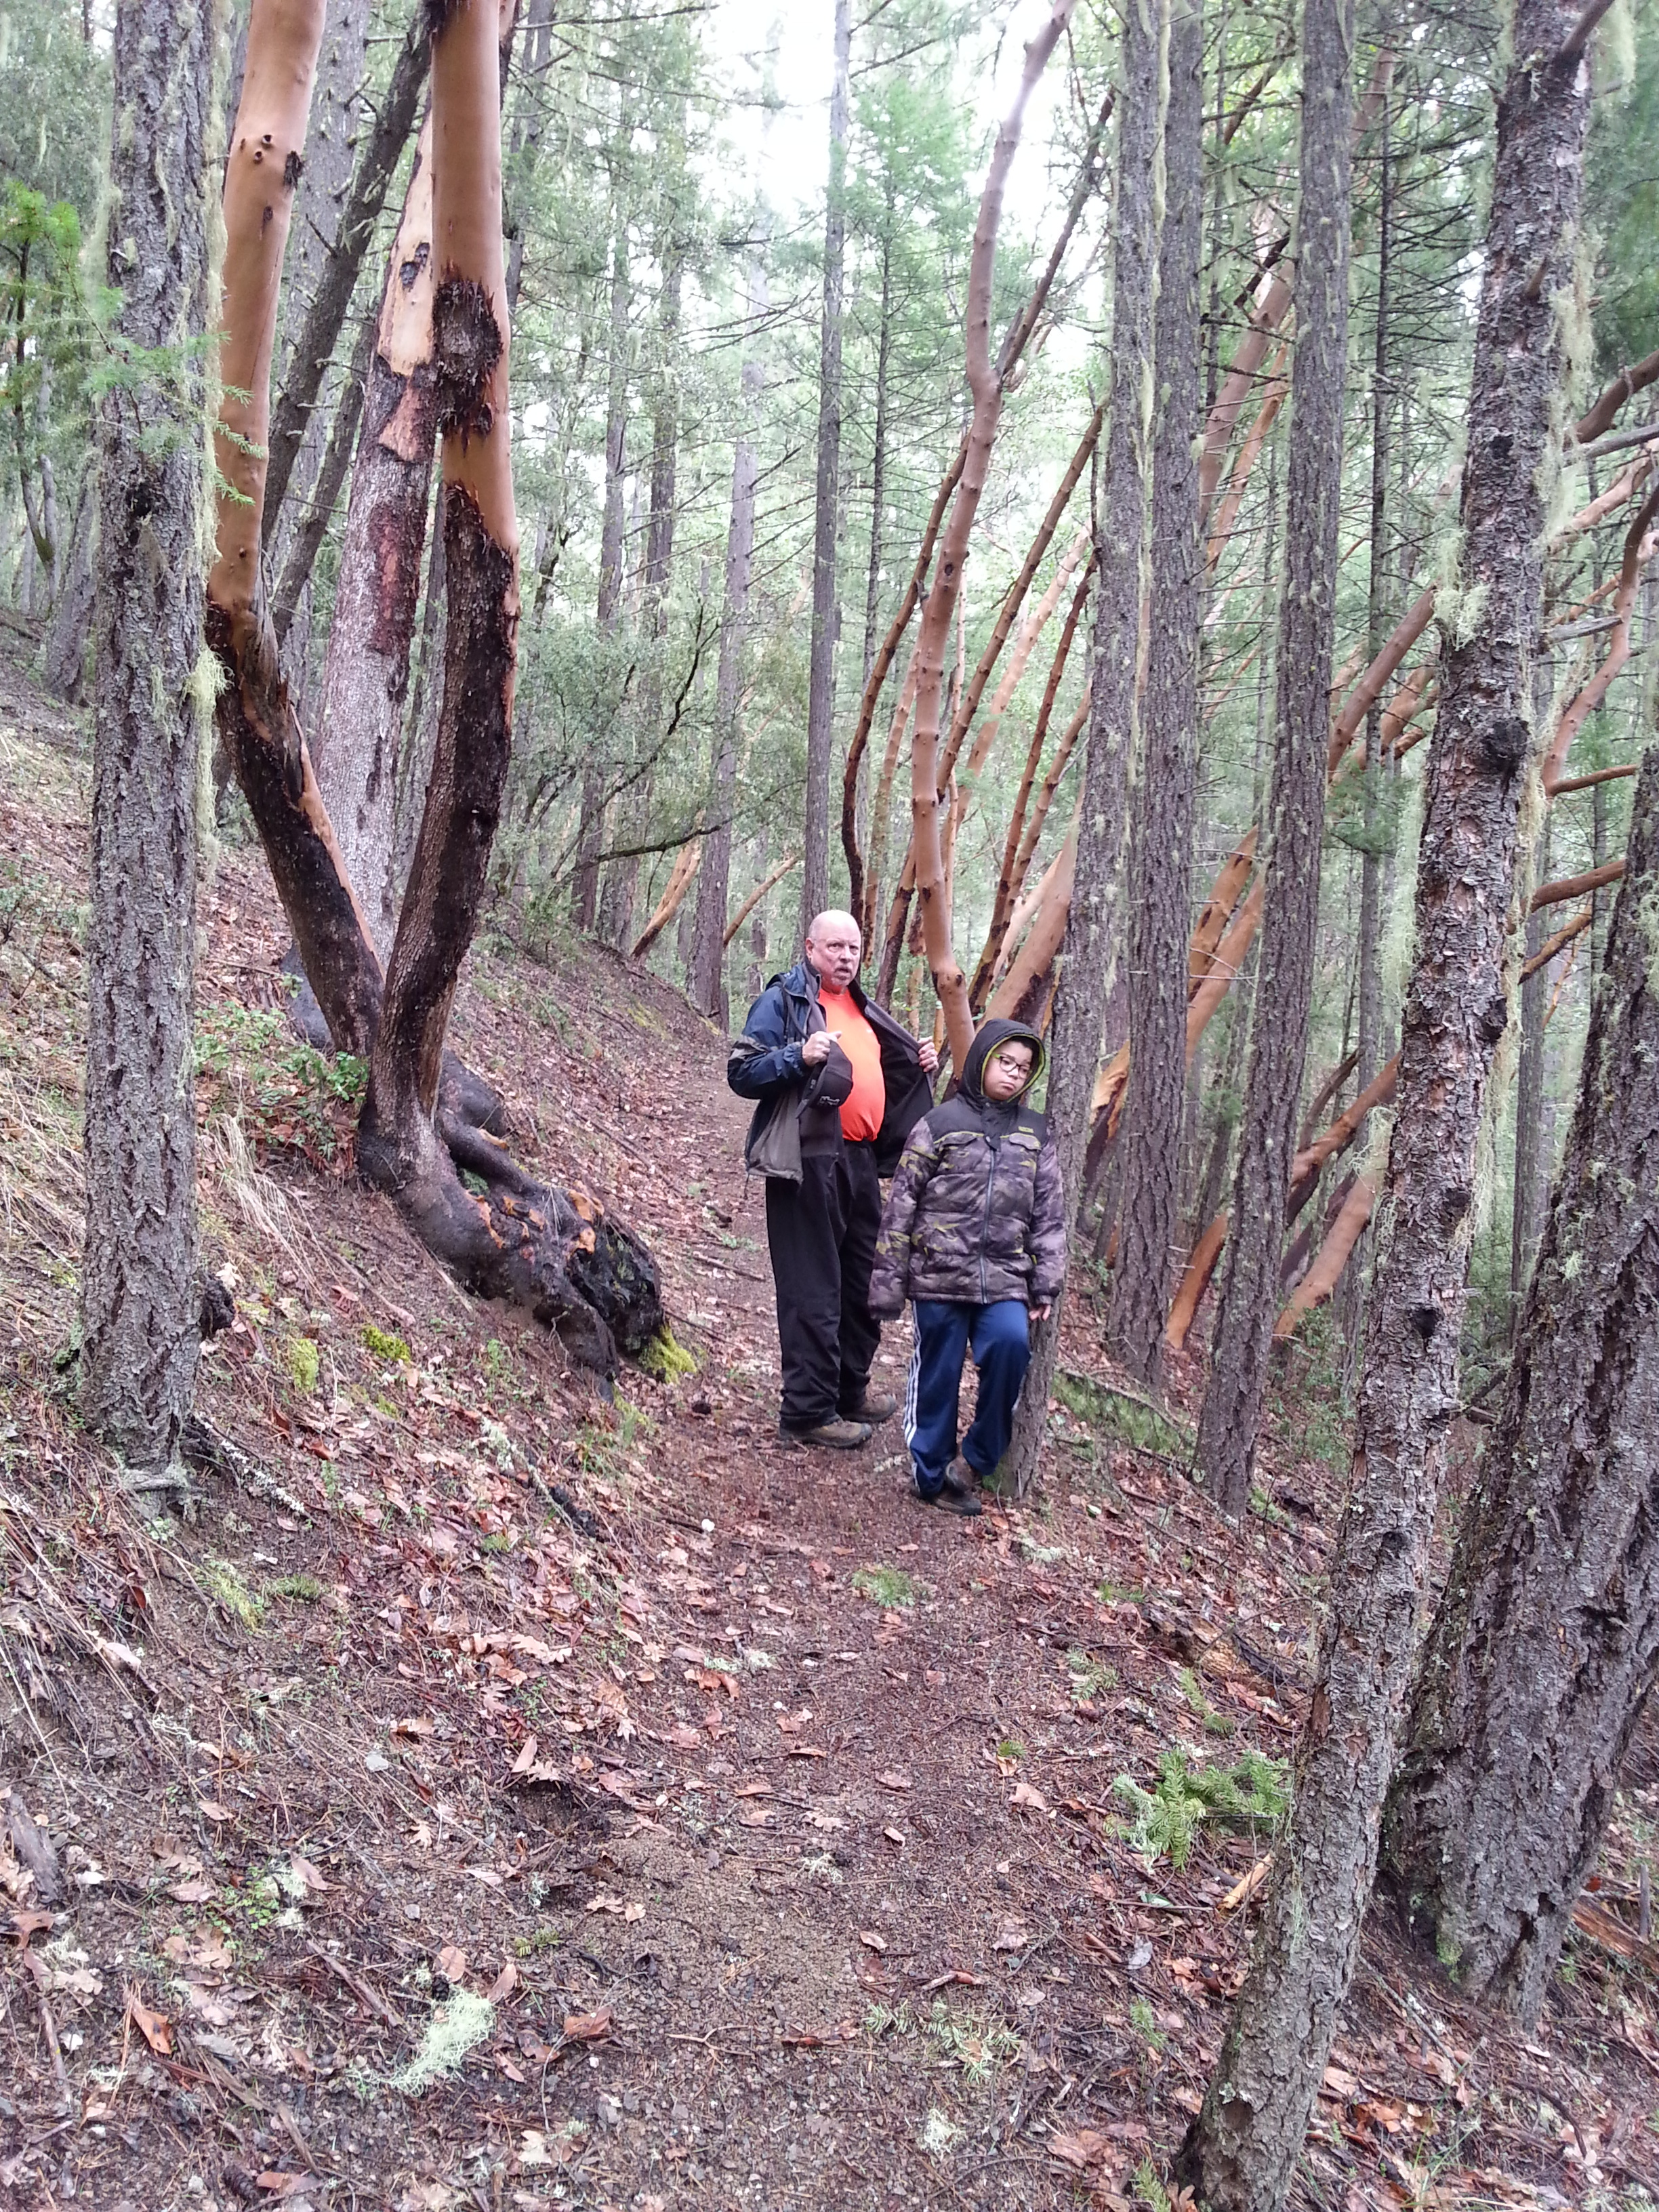 GROUSE LOOP TRAIL - What to do in Southern Oregon - Things to do - Hiking - Kids - Applegate - Jacksonville